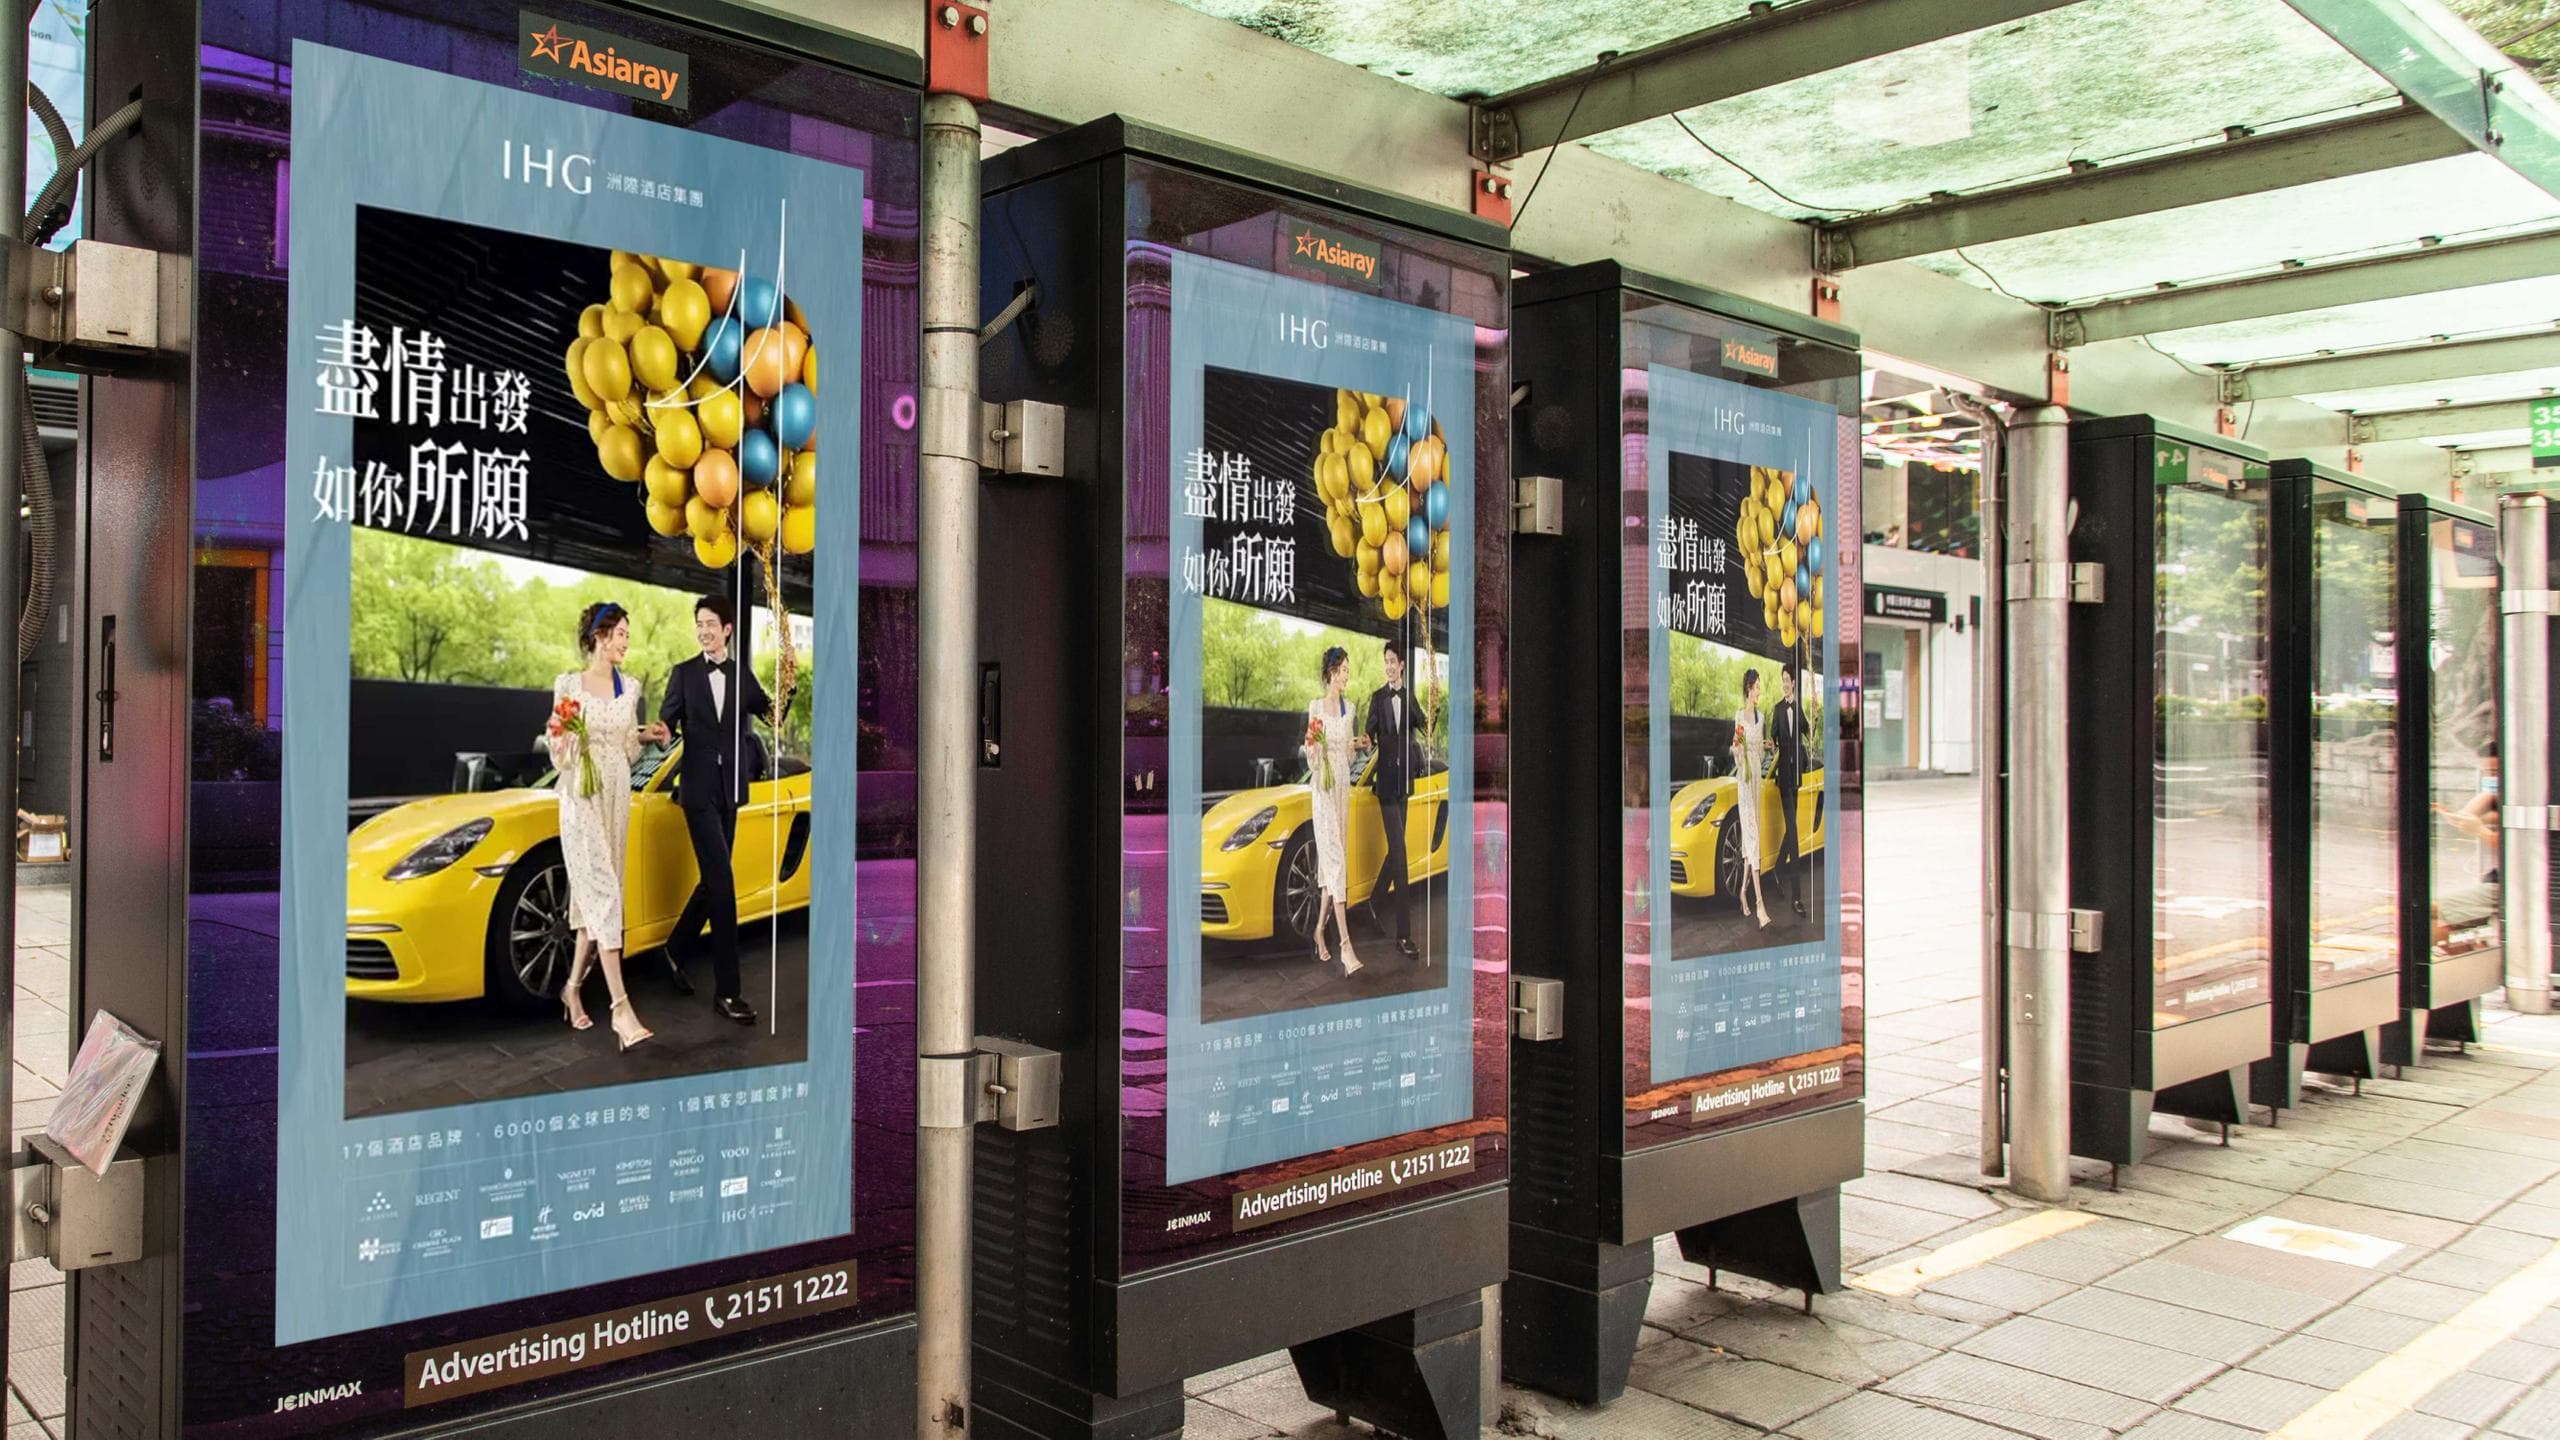 The leading global hotel group implemented programmatic digital out of home (DOOH) across multiple formats to drive brand awareness and consideration